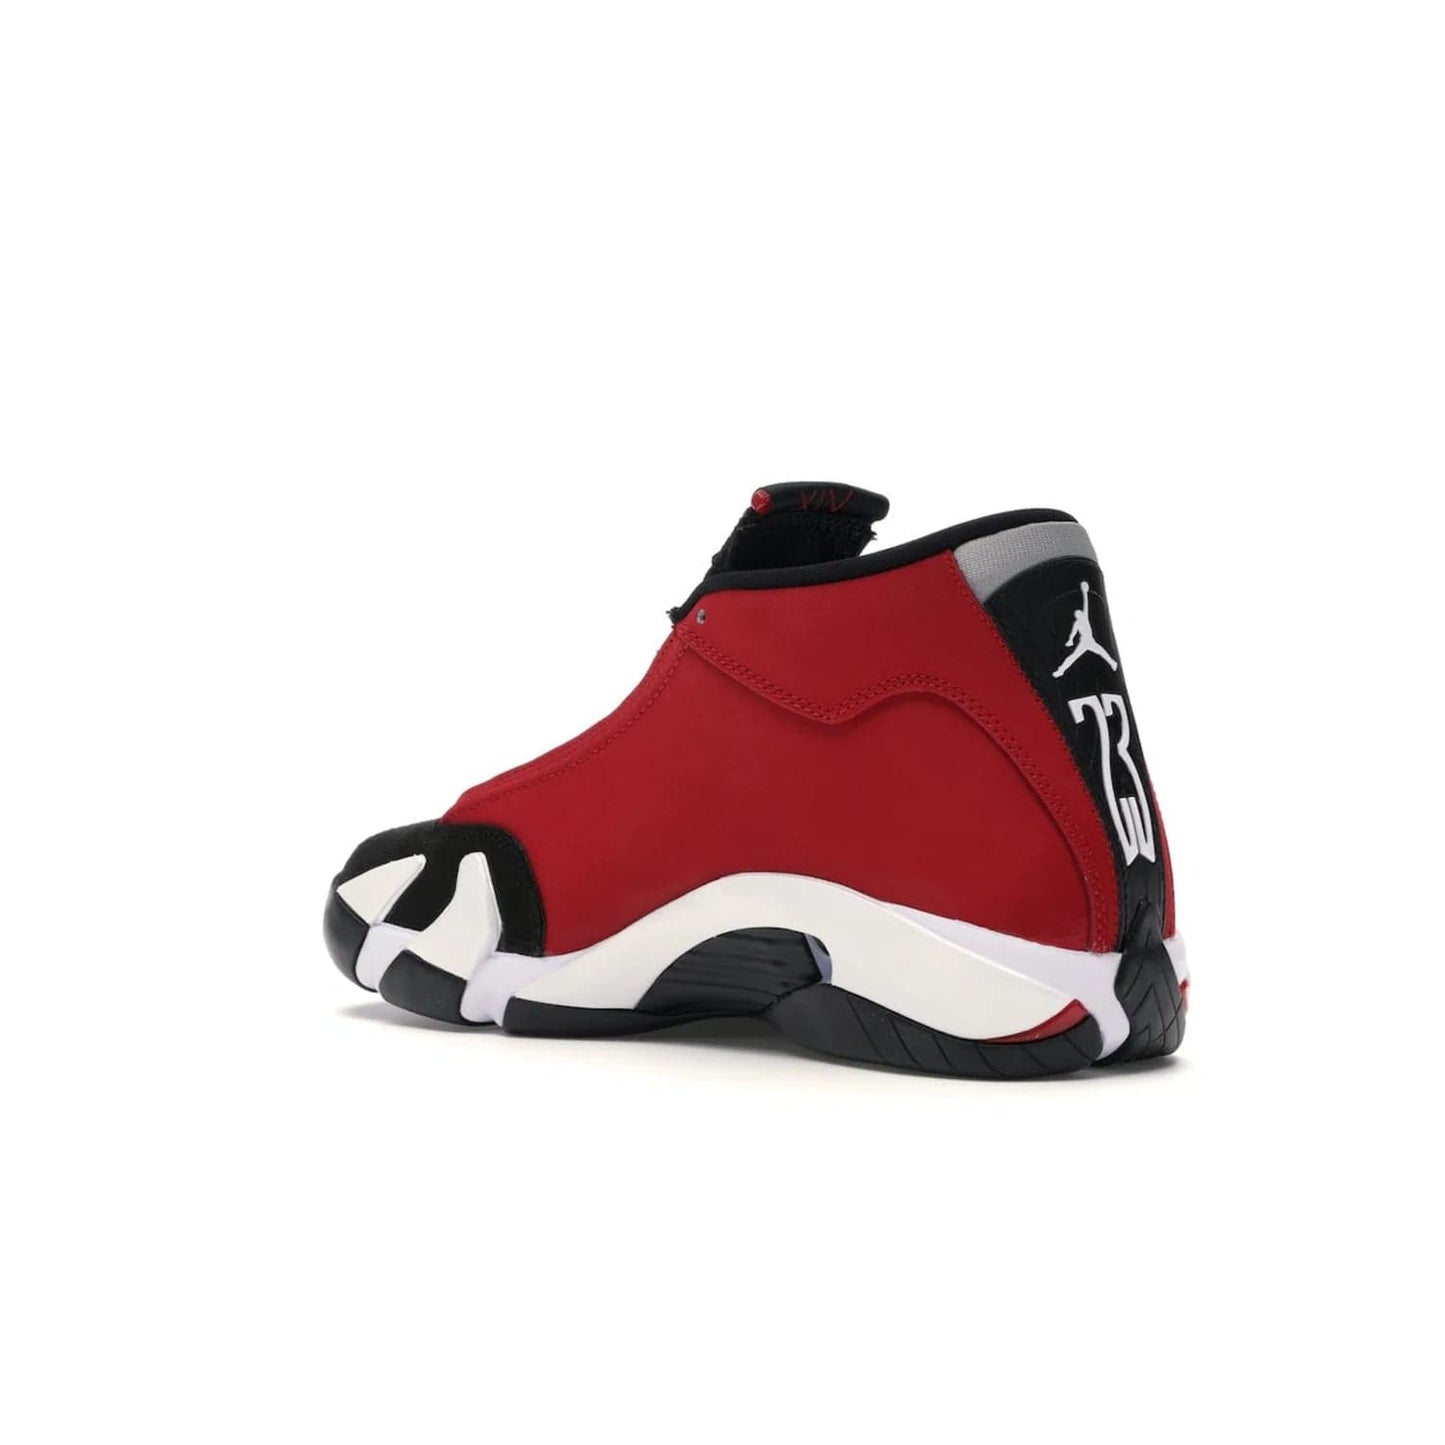 Jordan 14 Retro Gym Red Toro - Image 23 - Only at www.BallersClubKickz.com - Feel the Chicago Bulls energy with the Jordan 14 Retro Gym Red Toro! Black, red, and white design unites performance and fashion. Get your hands on this limited edition Jordan and show off your style today.